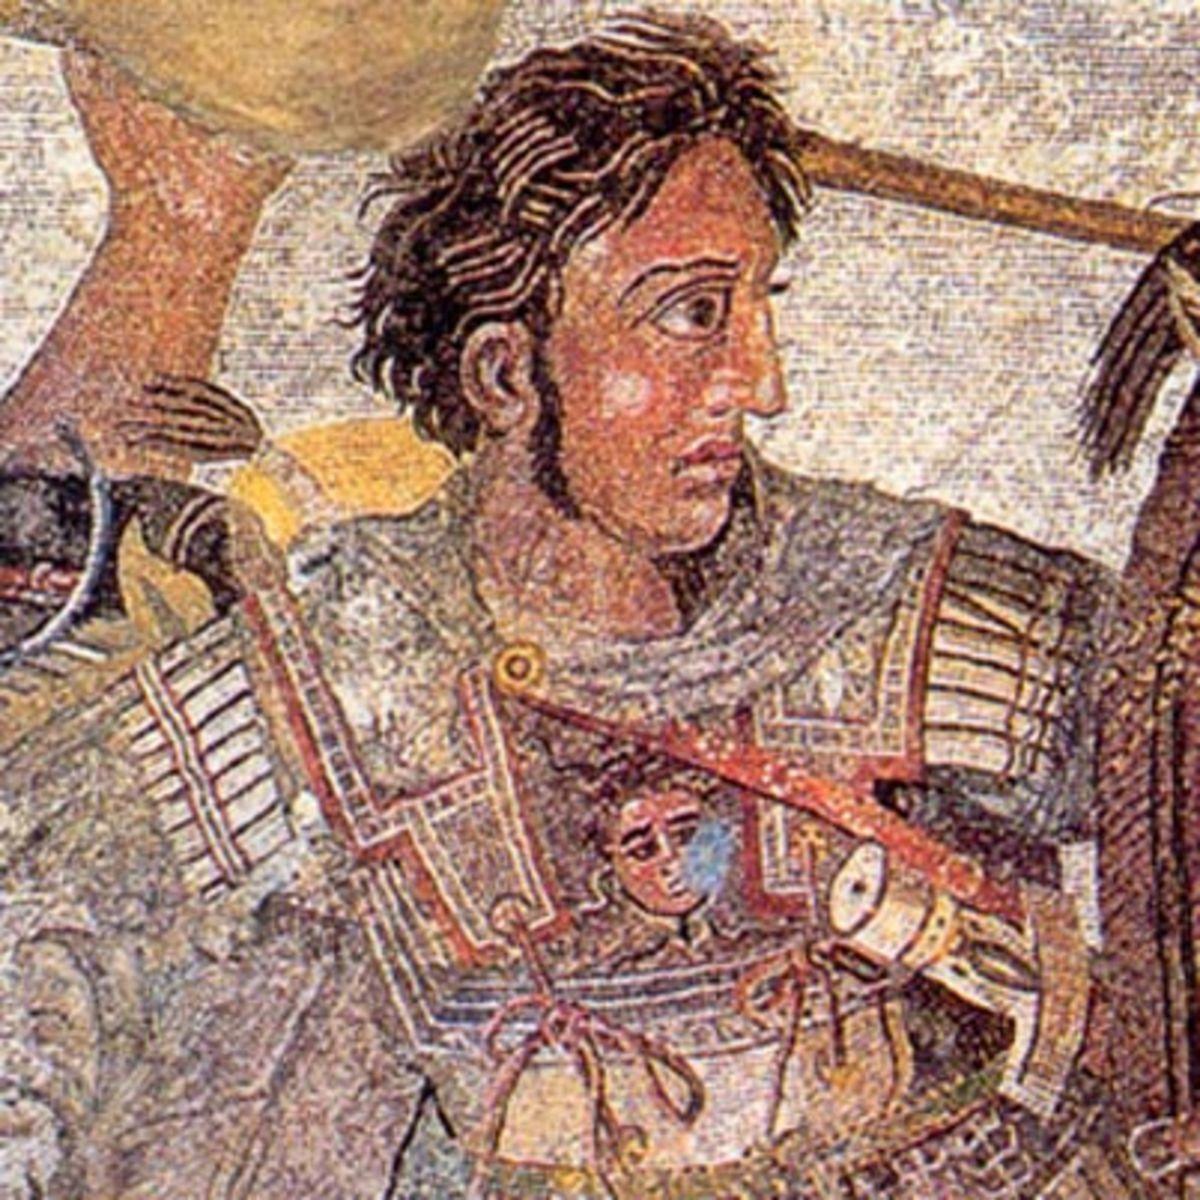 700x483px Alexander The Great 243.85 KB